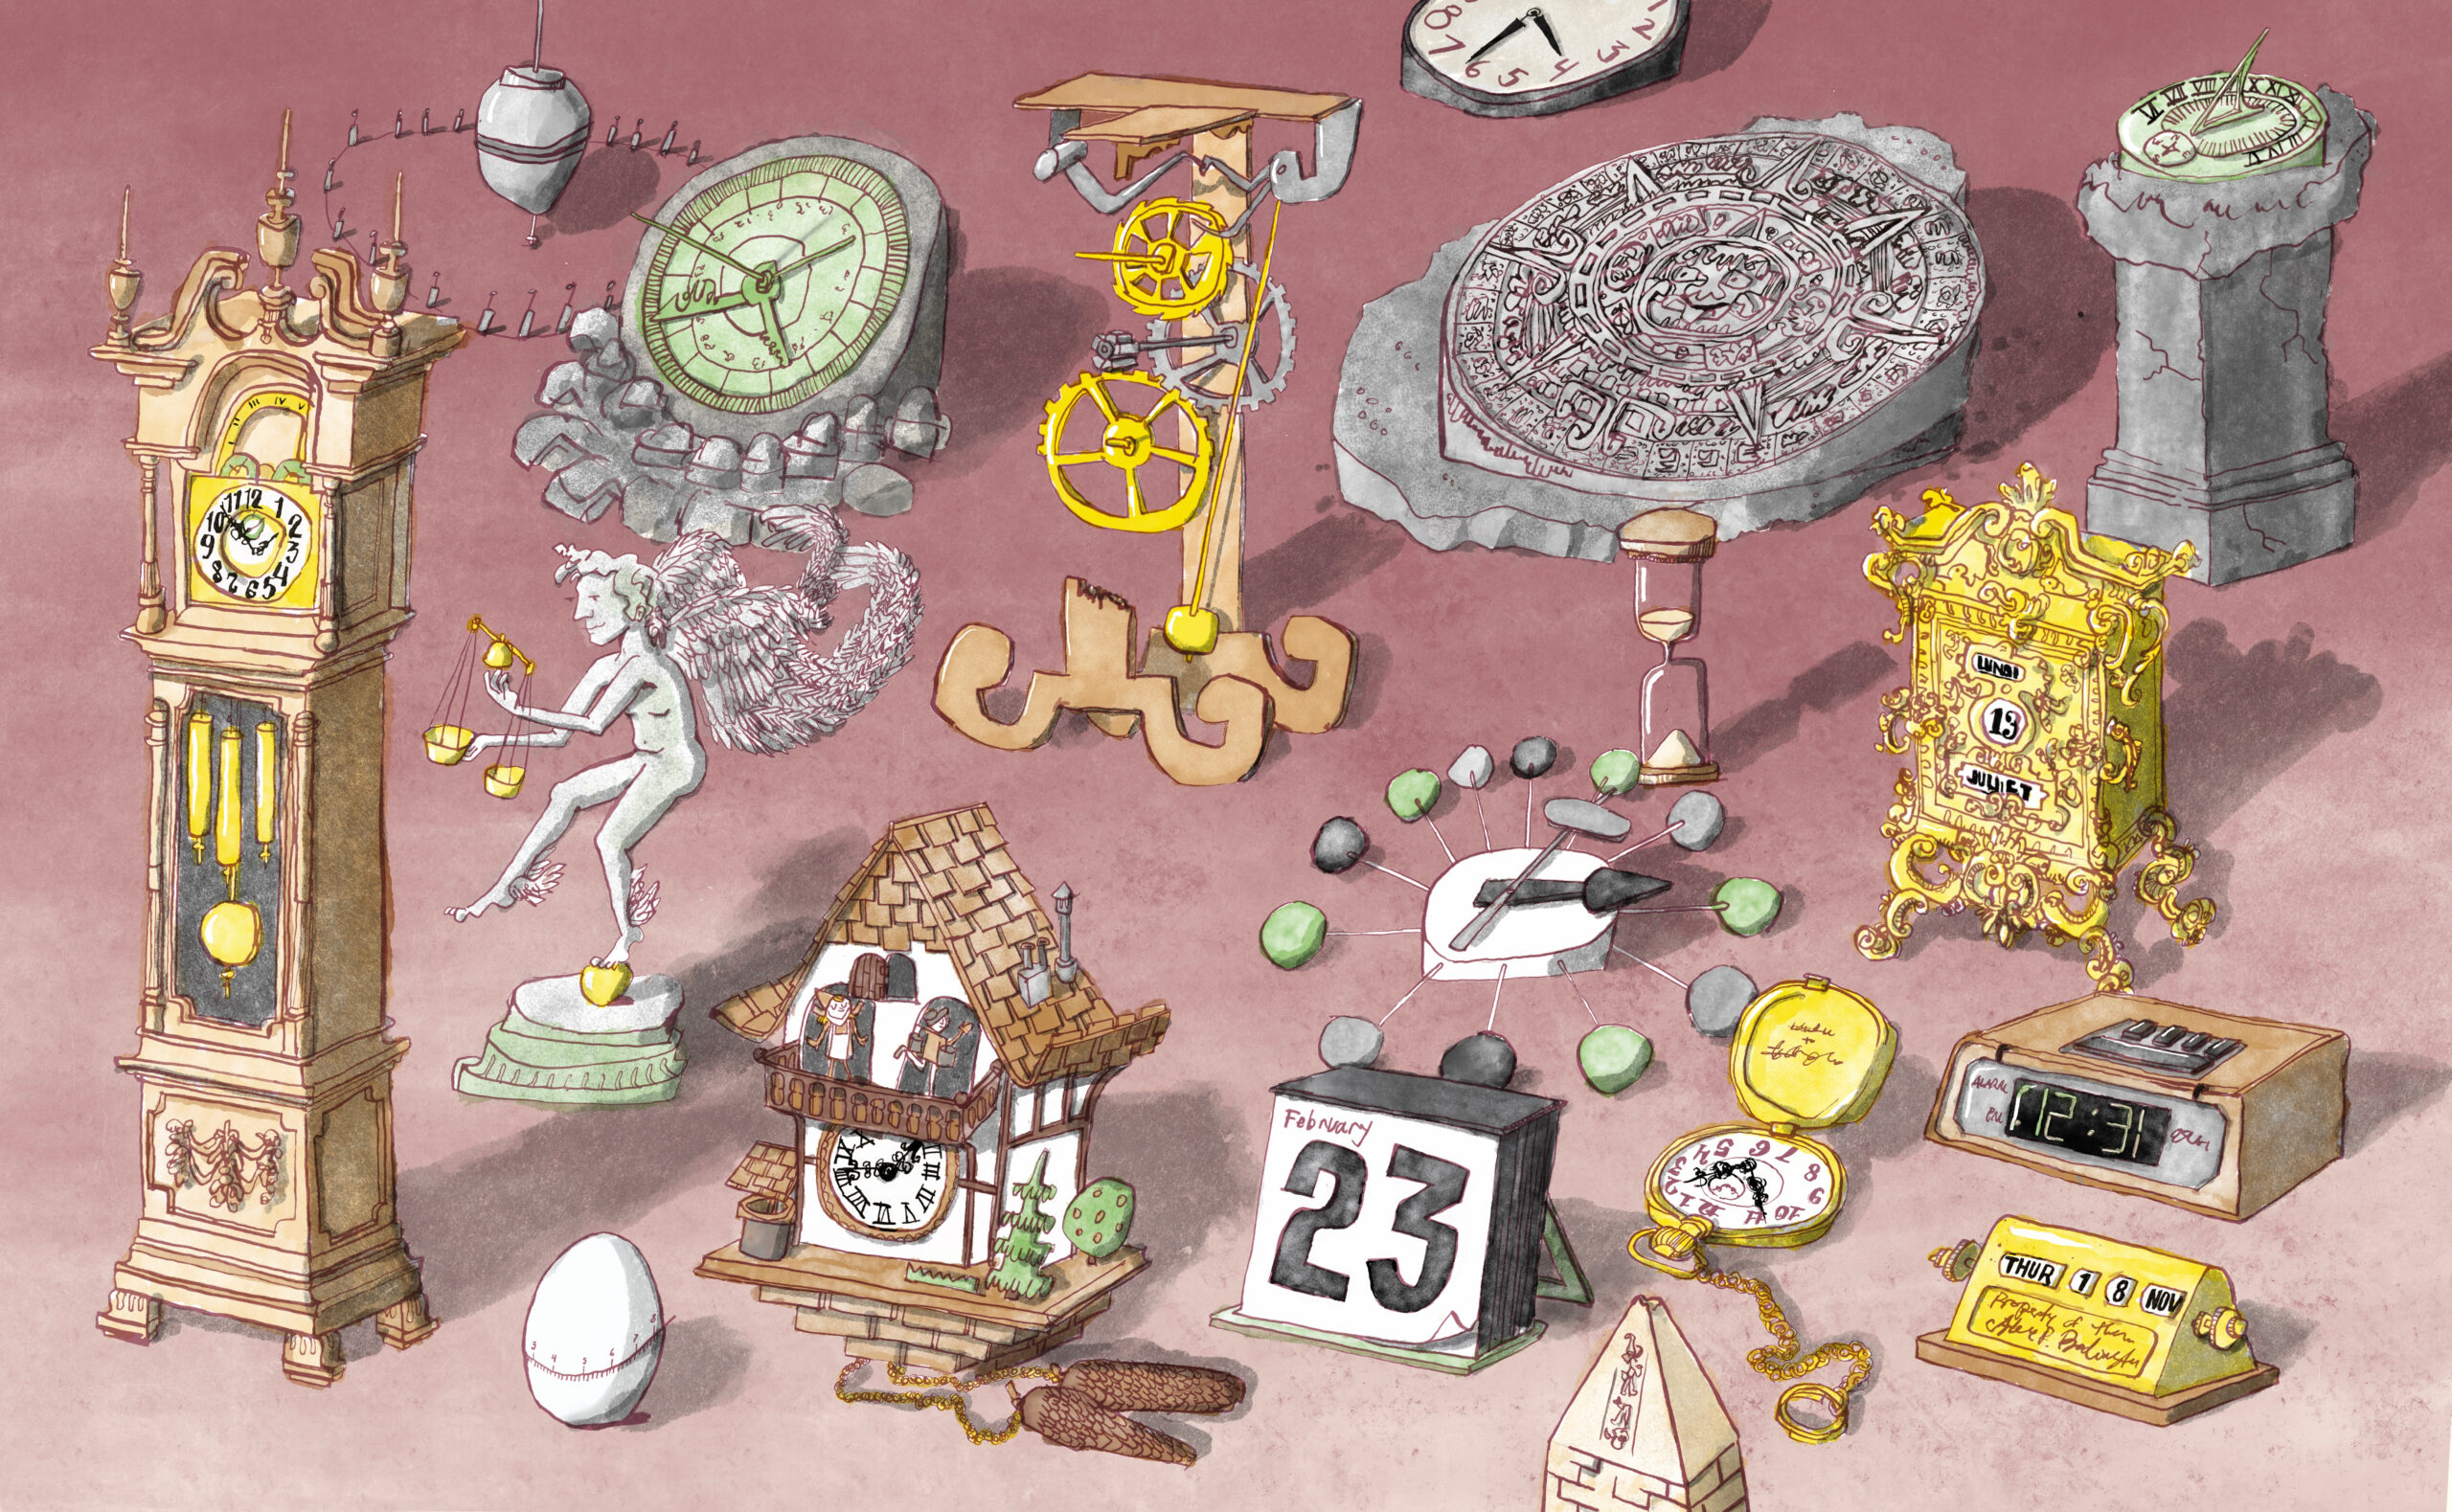 An illustration of various time-based elements, like clocks and calendars